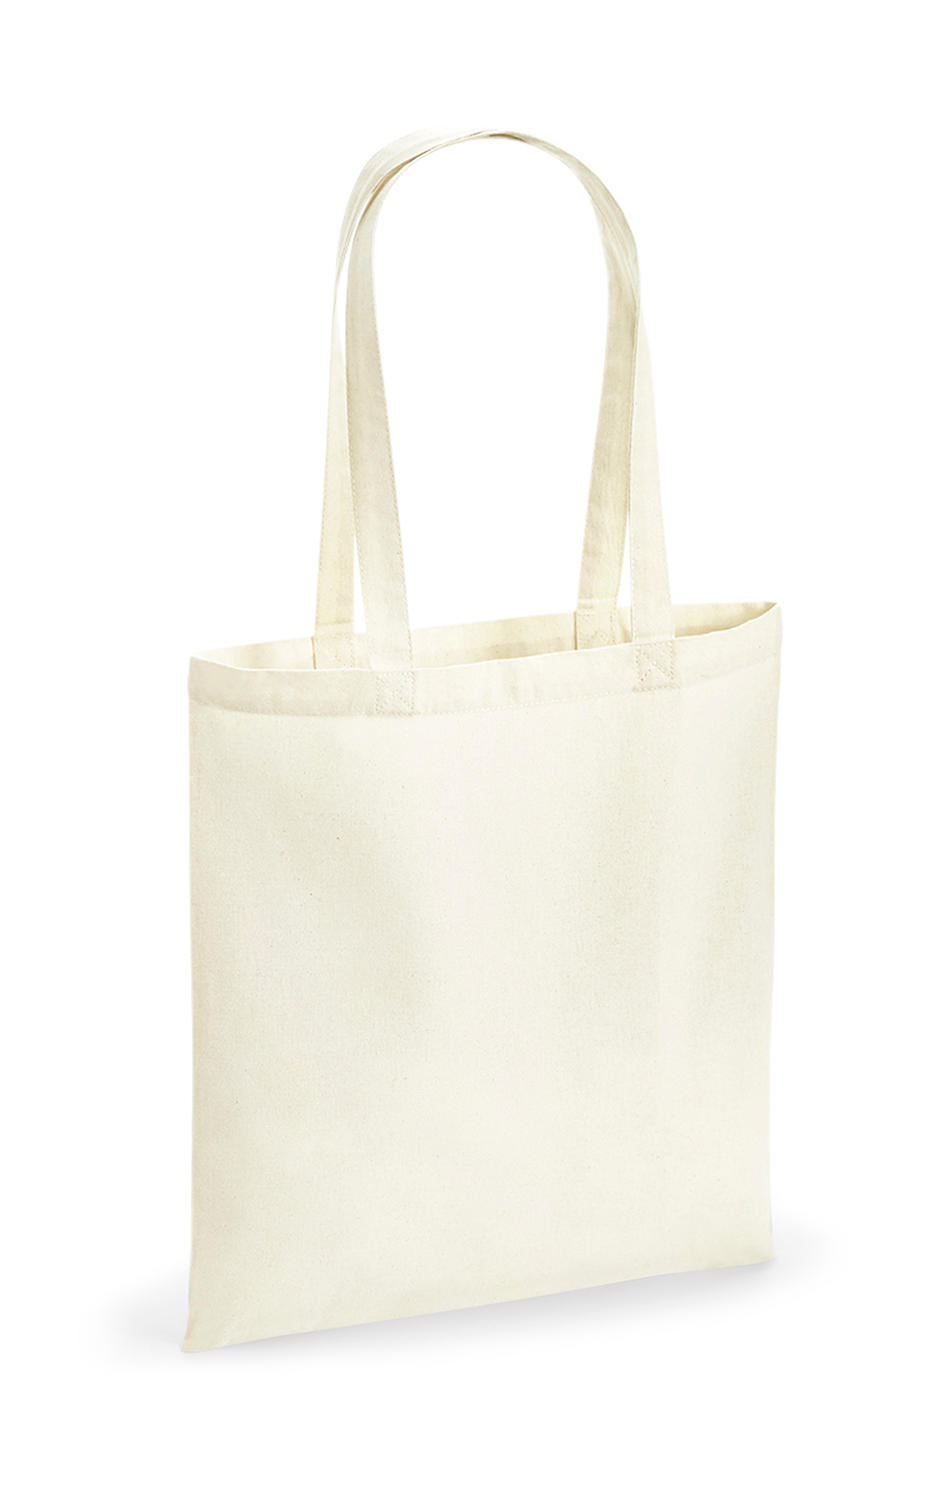  Recycled Cotton Tote in Farbe Natural